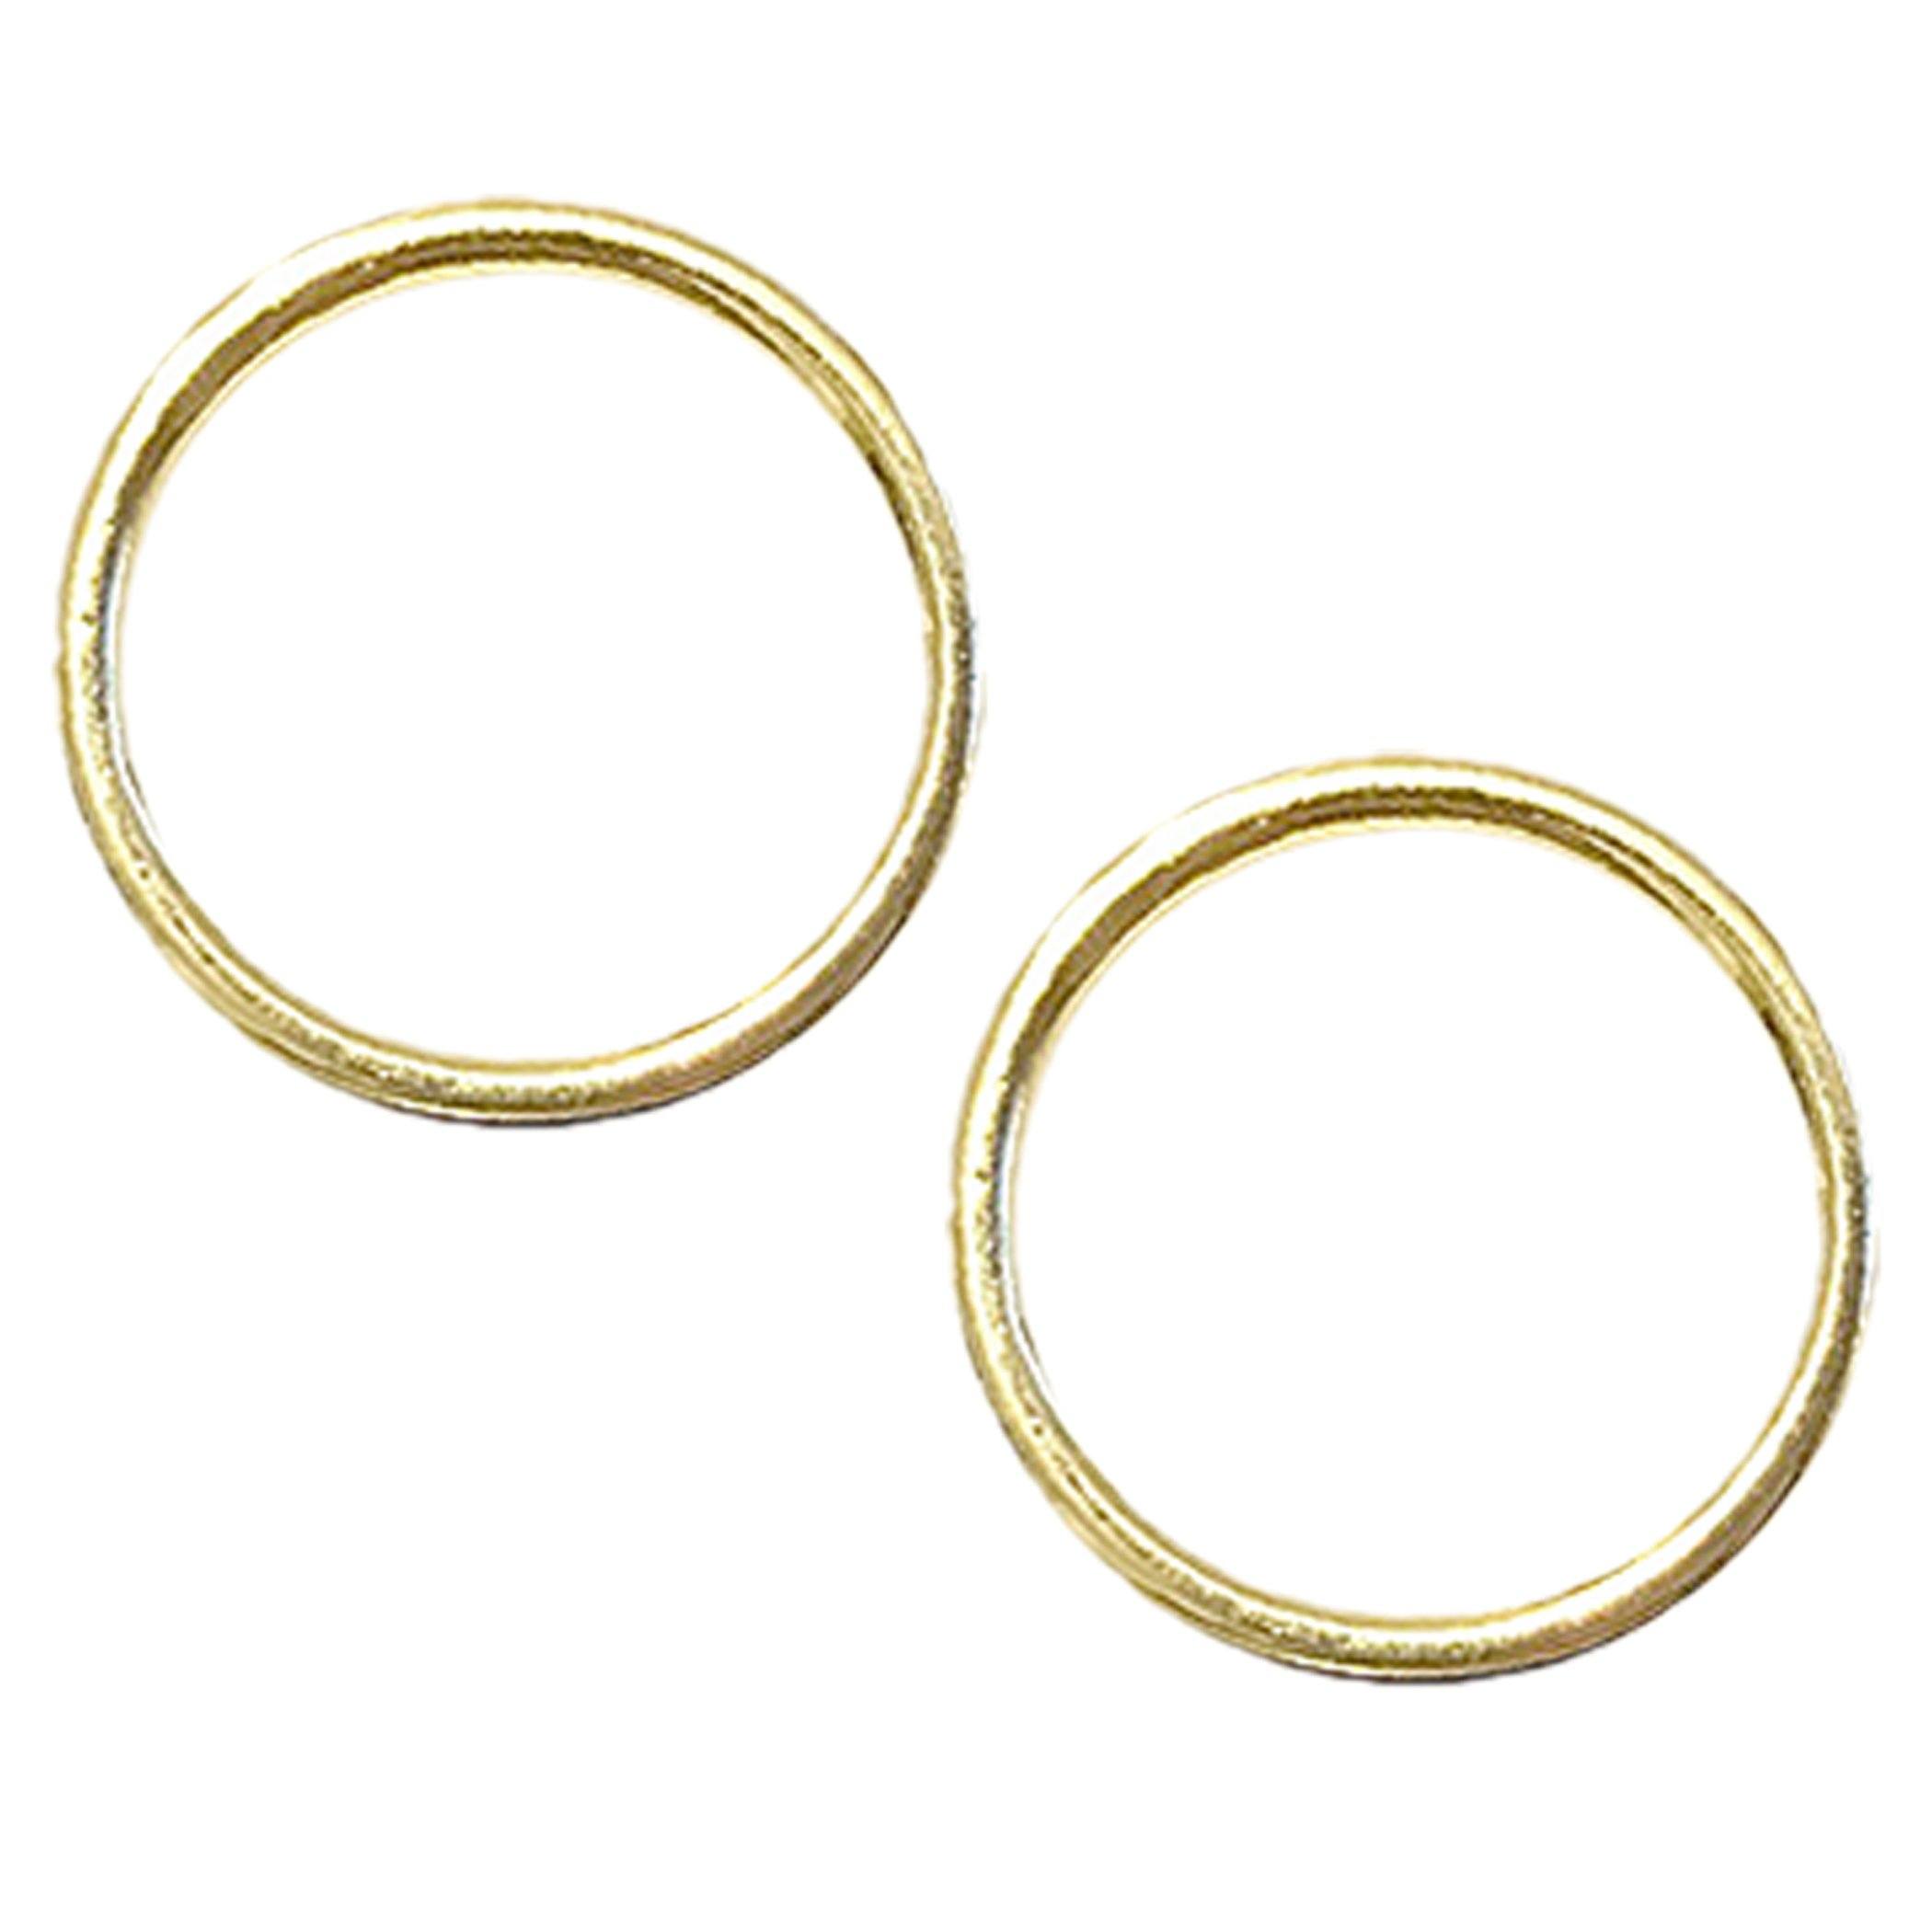 Set of 2 Rings OR 2 Sliders in Gold– 1/4" (6mm), 3/8" (10mm), 1/2" (12mm), 5/8" (15mm), 3/4" (20mm), 1" (25mm)-Stitch Love Studio